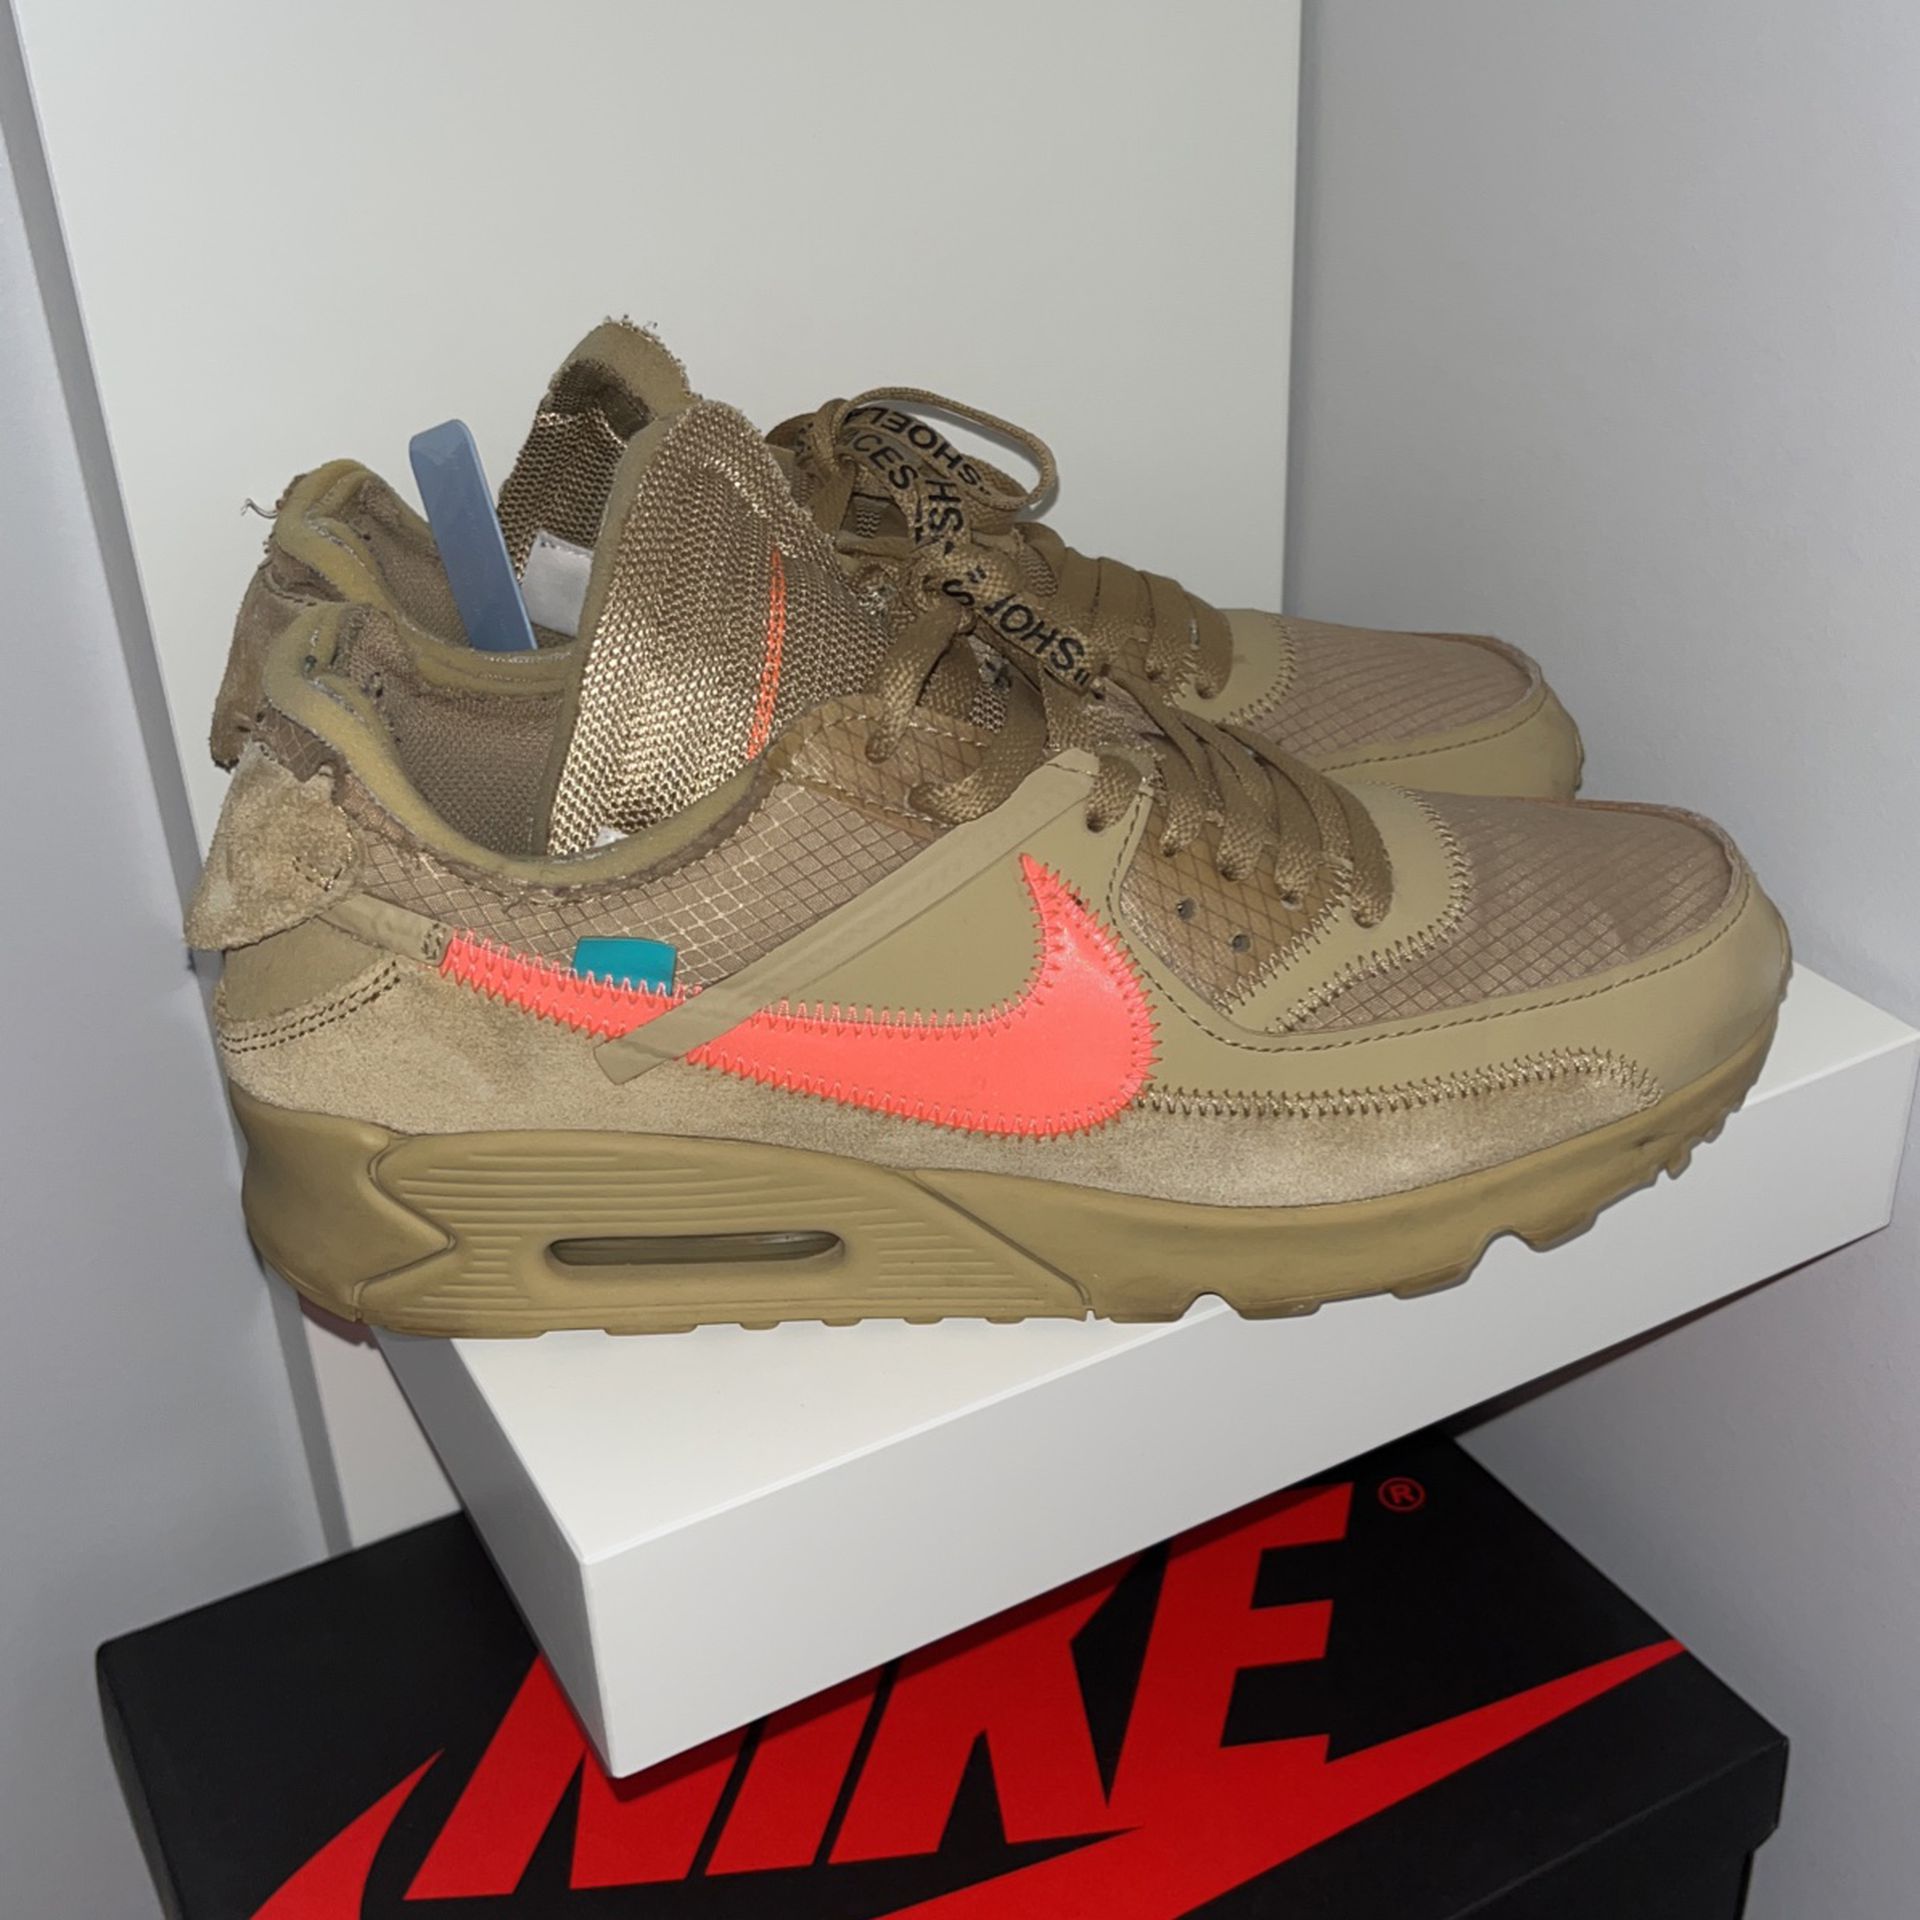 Nike White Air Max 90 10 for Sale in Kennesaw, GA - OfferUp